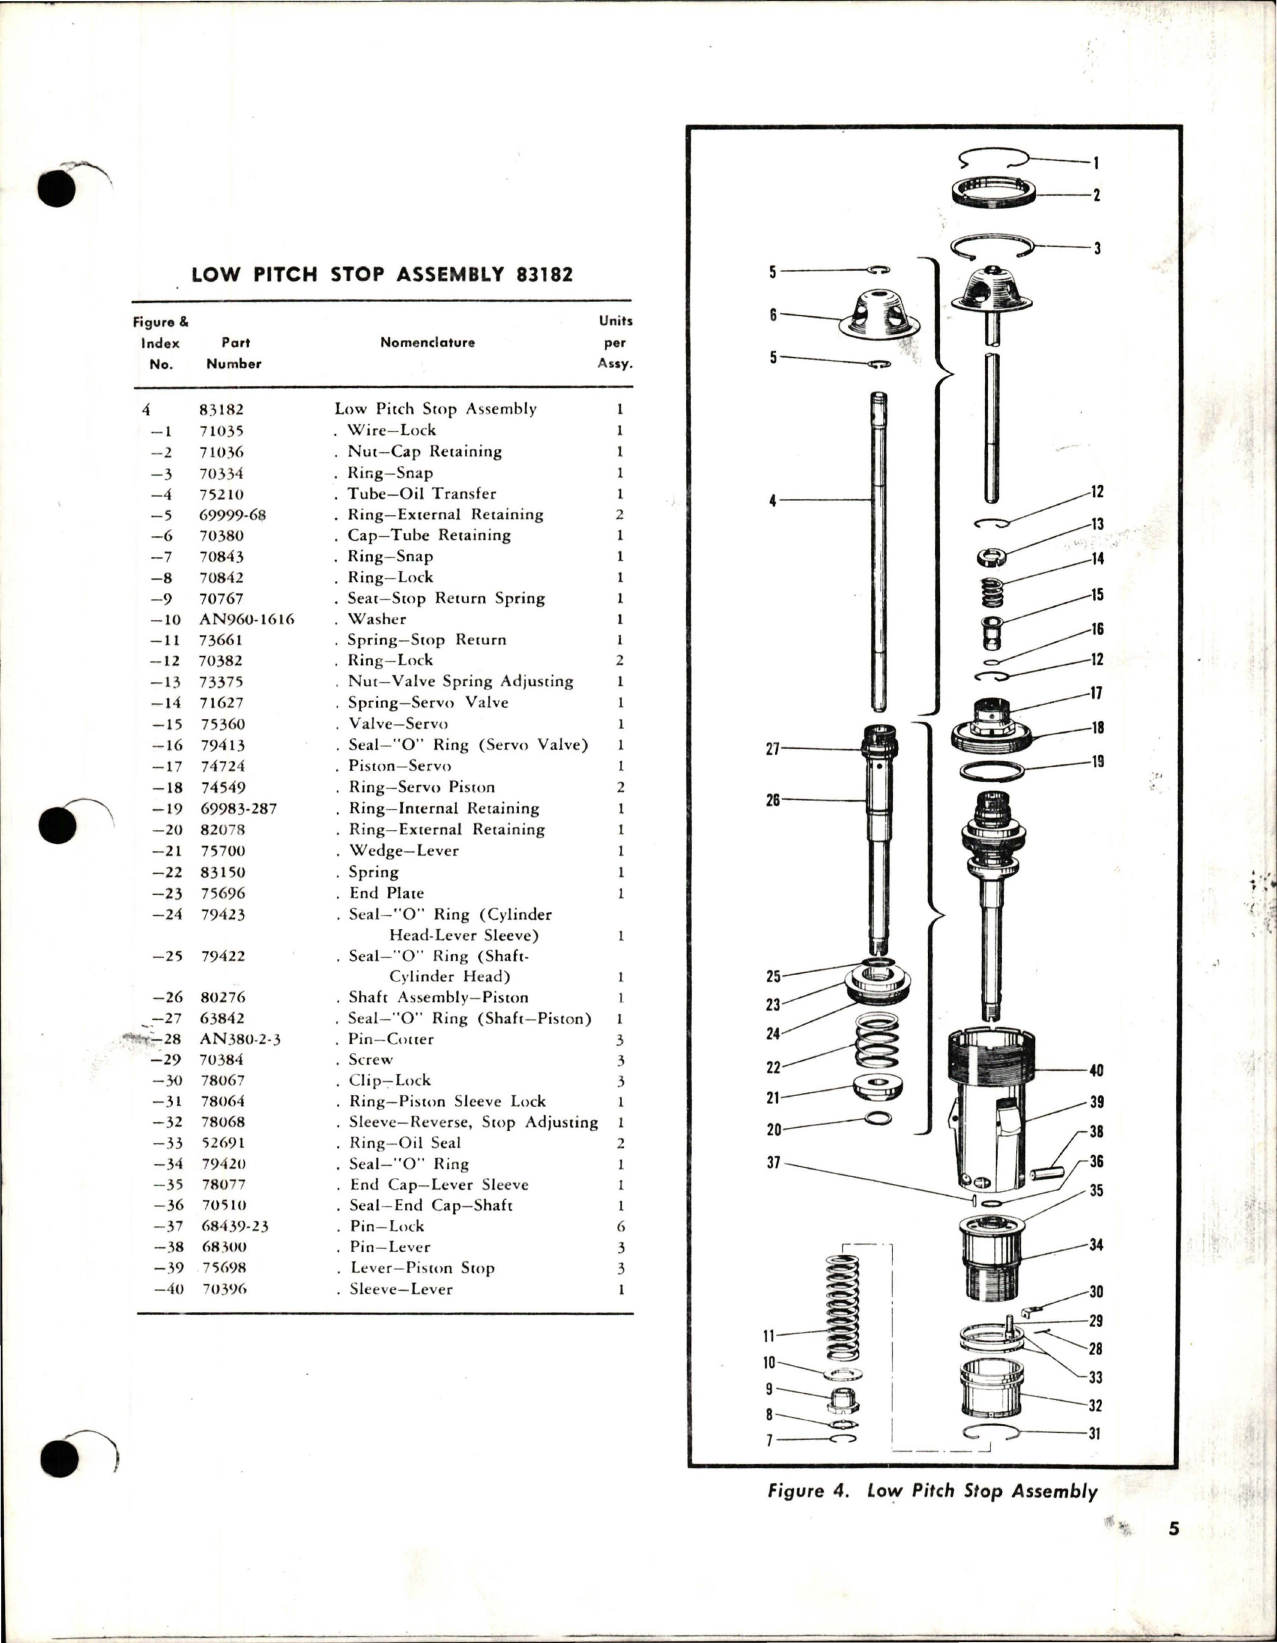 Sample page 7 from AirCorps Library document: Parts Catalog for Hydromatic Propeller